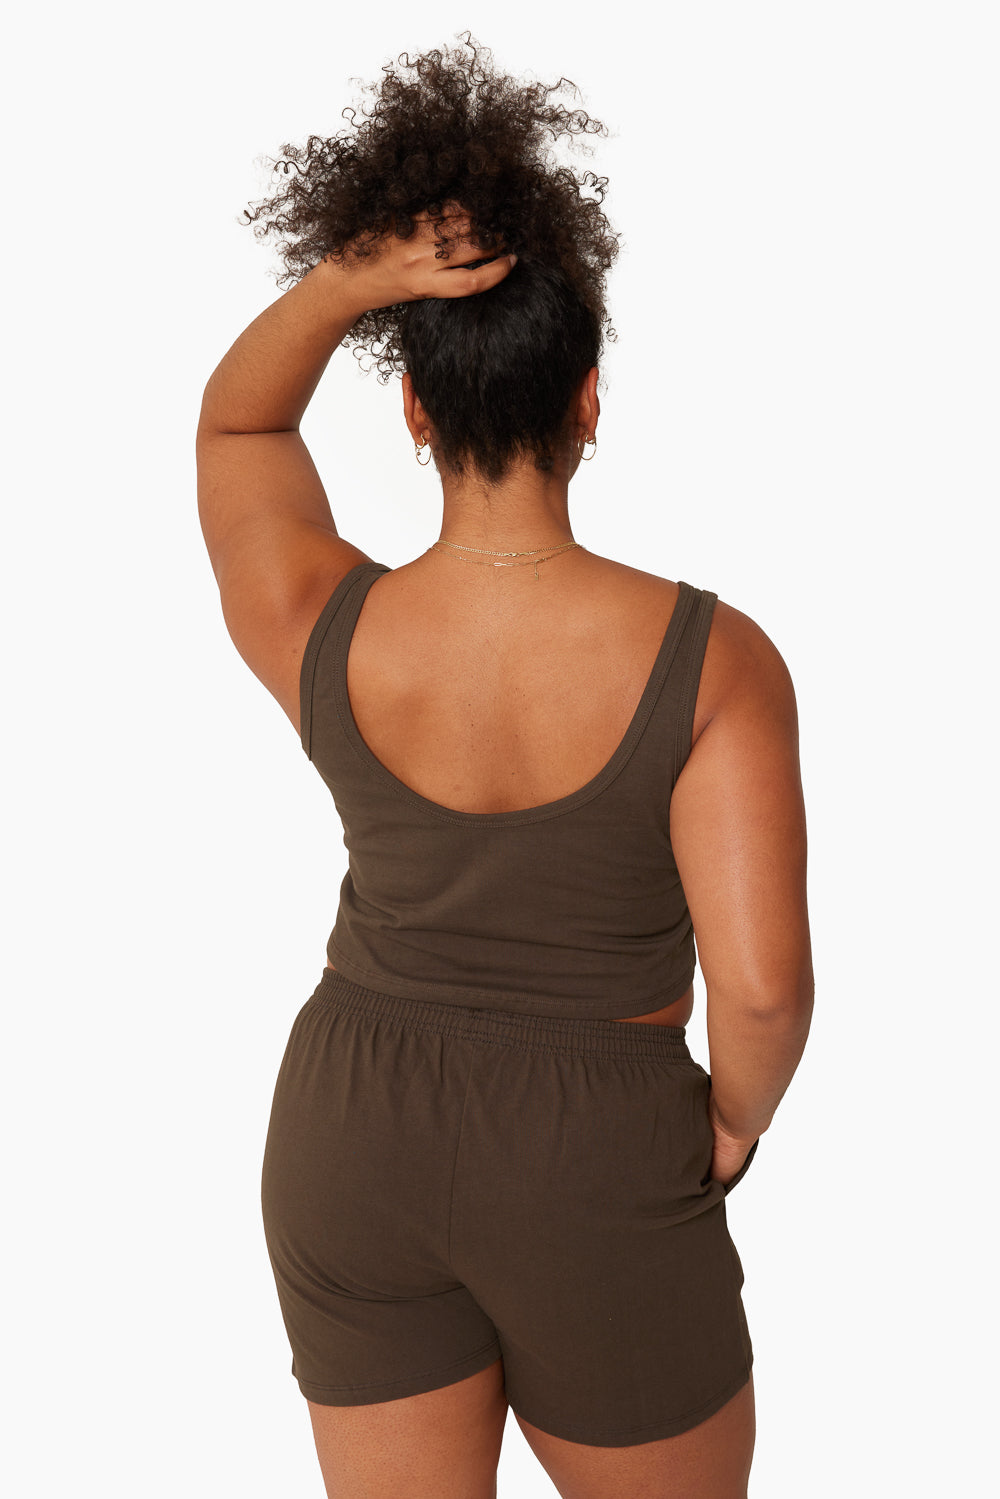 SET™ HEAVY COTTON EASY RELAXED TANK IN BROWNSTONE